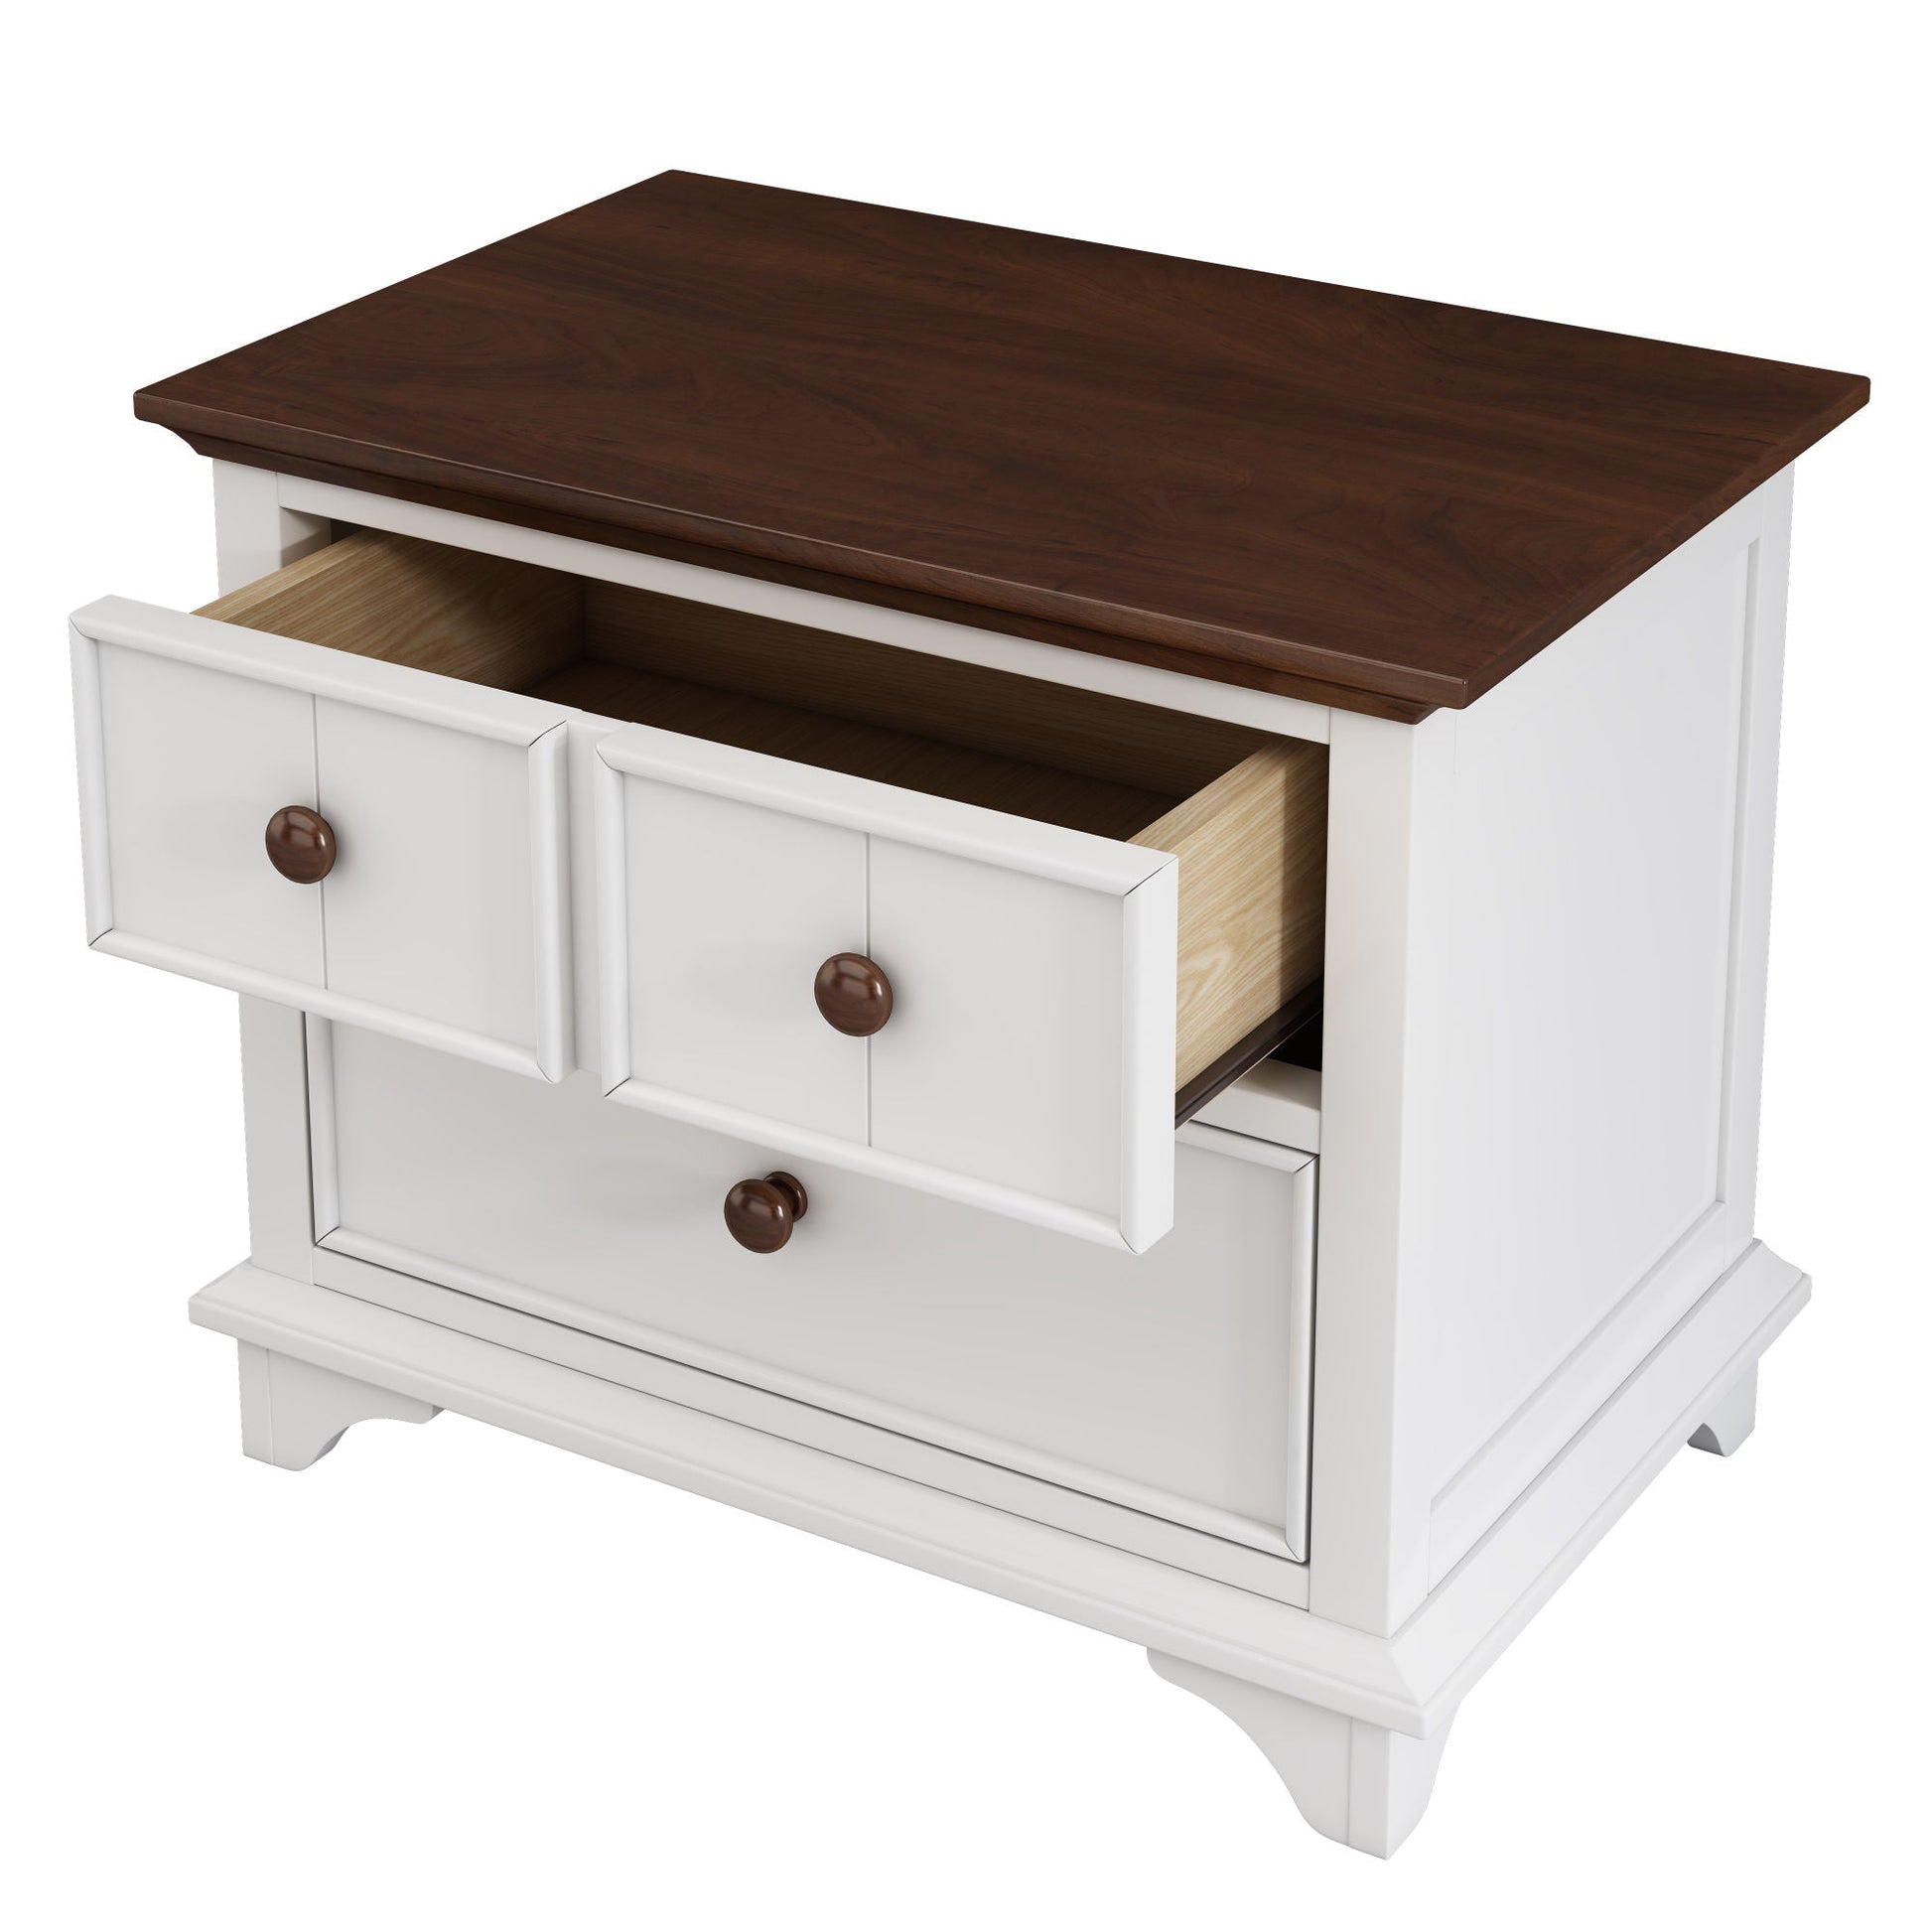 Wooden Captain Two-Drawer Nightstand Kids Night Stand End Side Table for Bedroom, Living Room, Kids' Room, White+Walnut Home Decor by Design